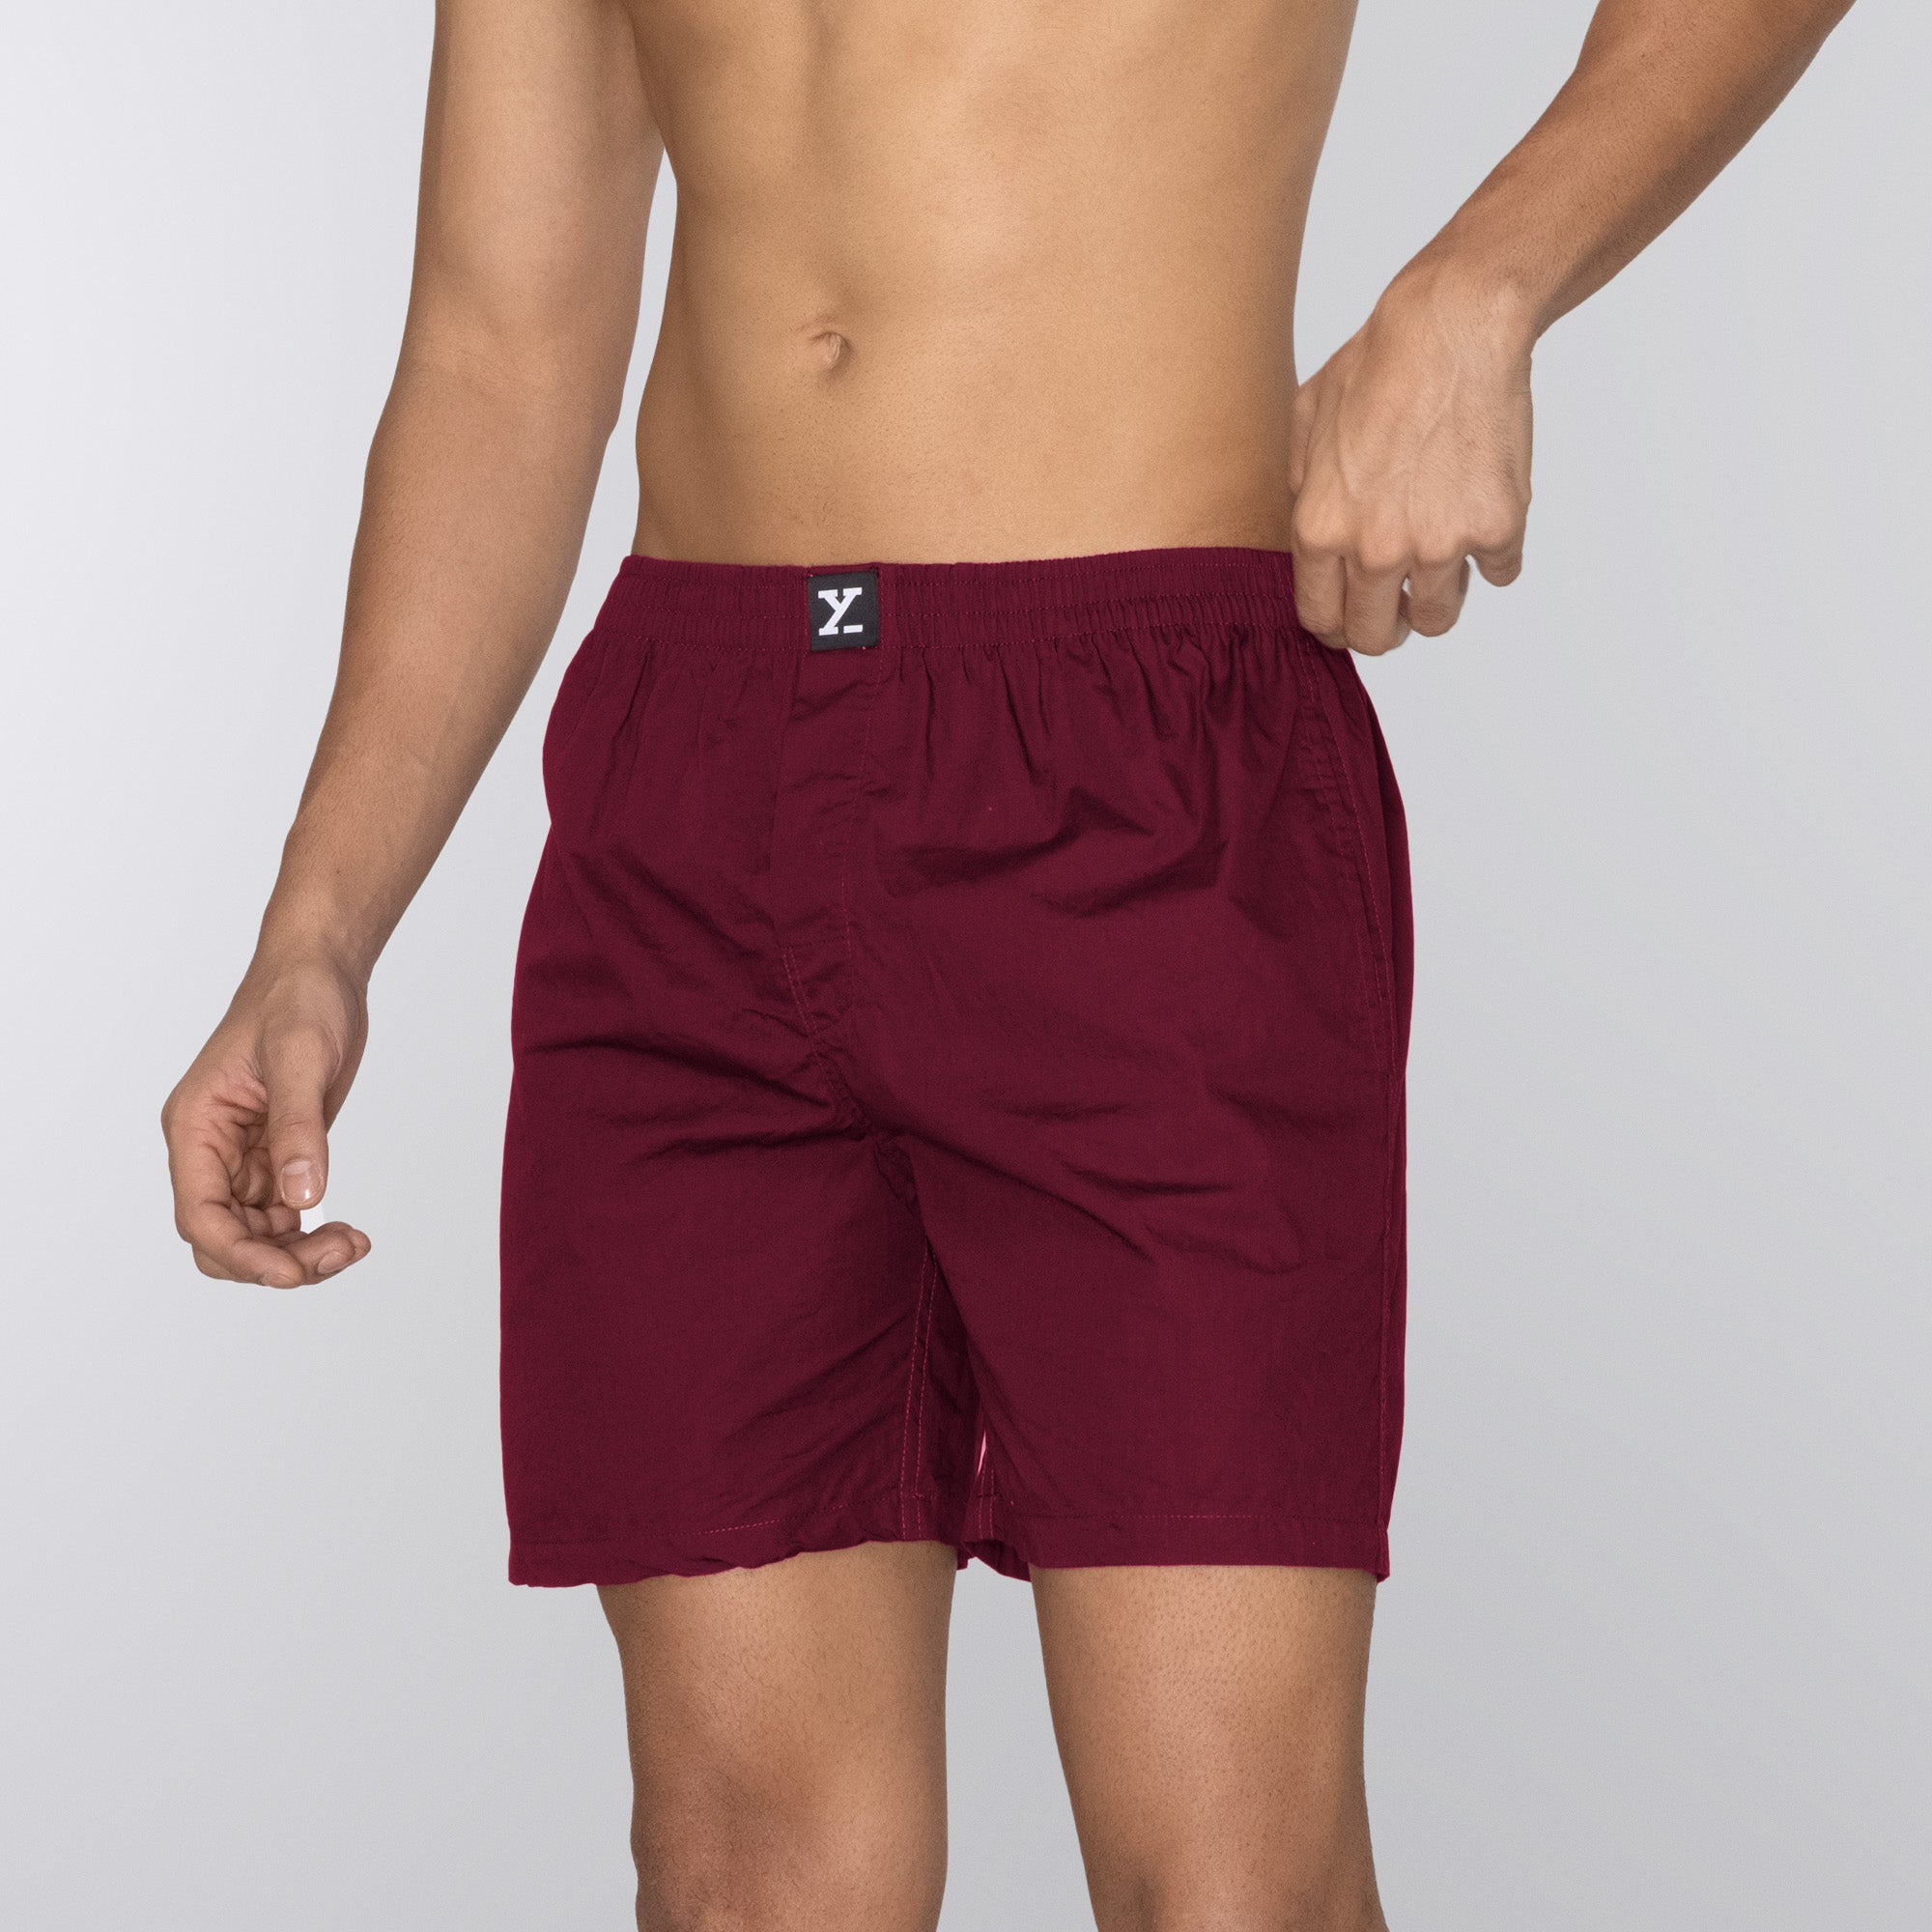 Pace Super Combed Cotton Boxer Shorts For Men Bold Burgundy - XYXX Crew